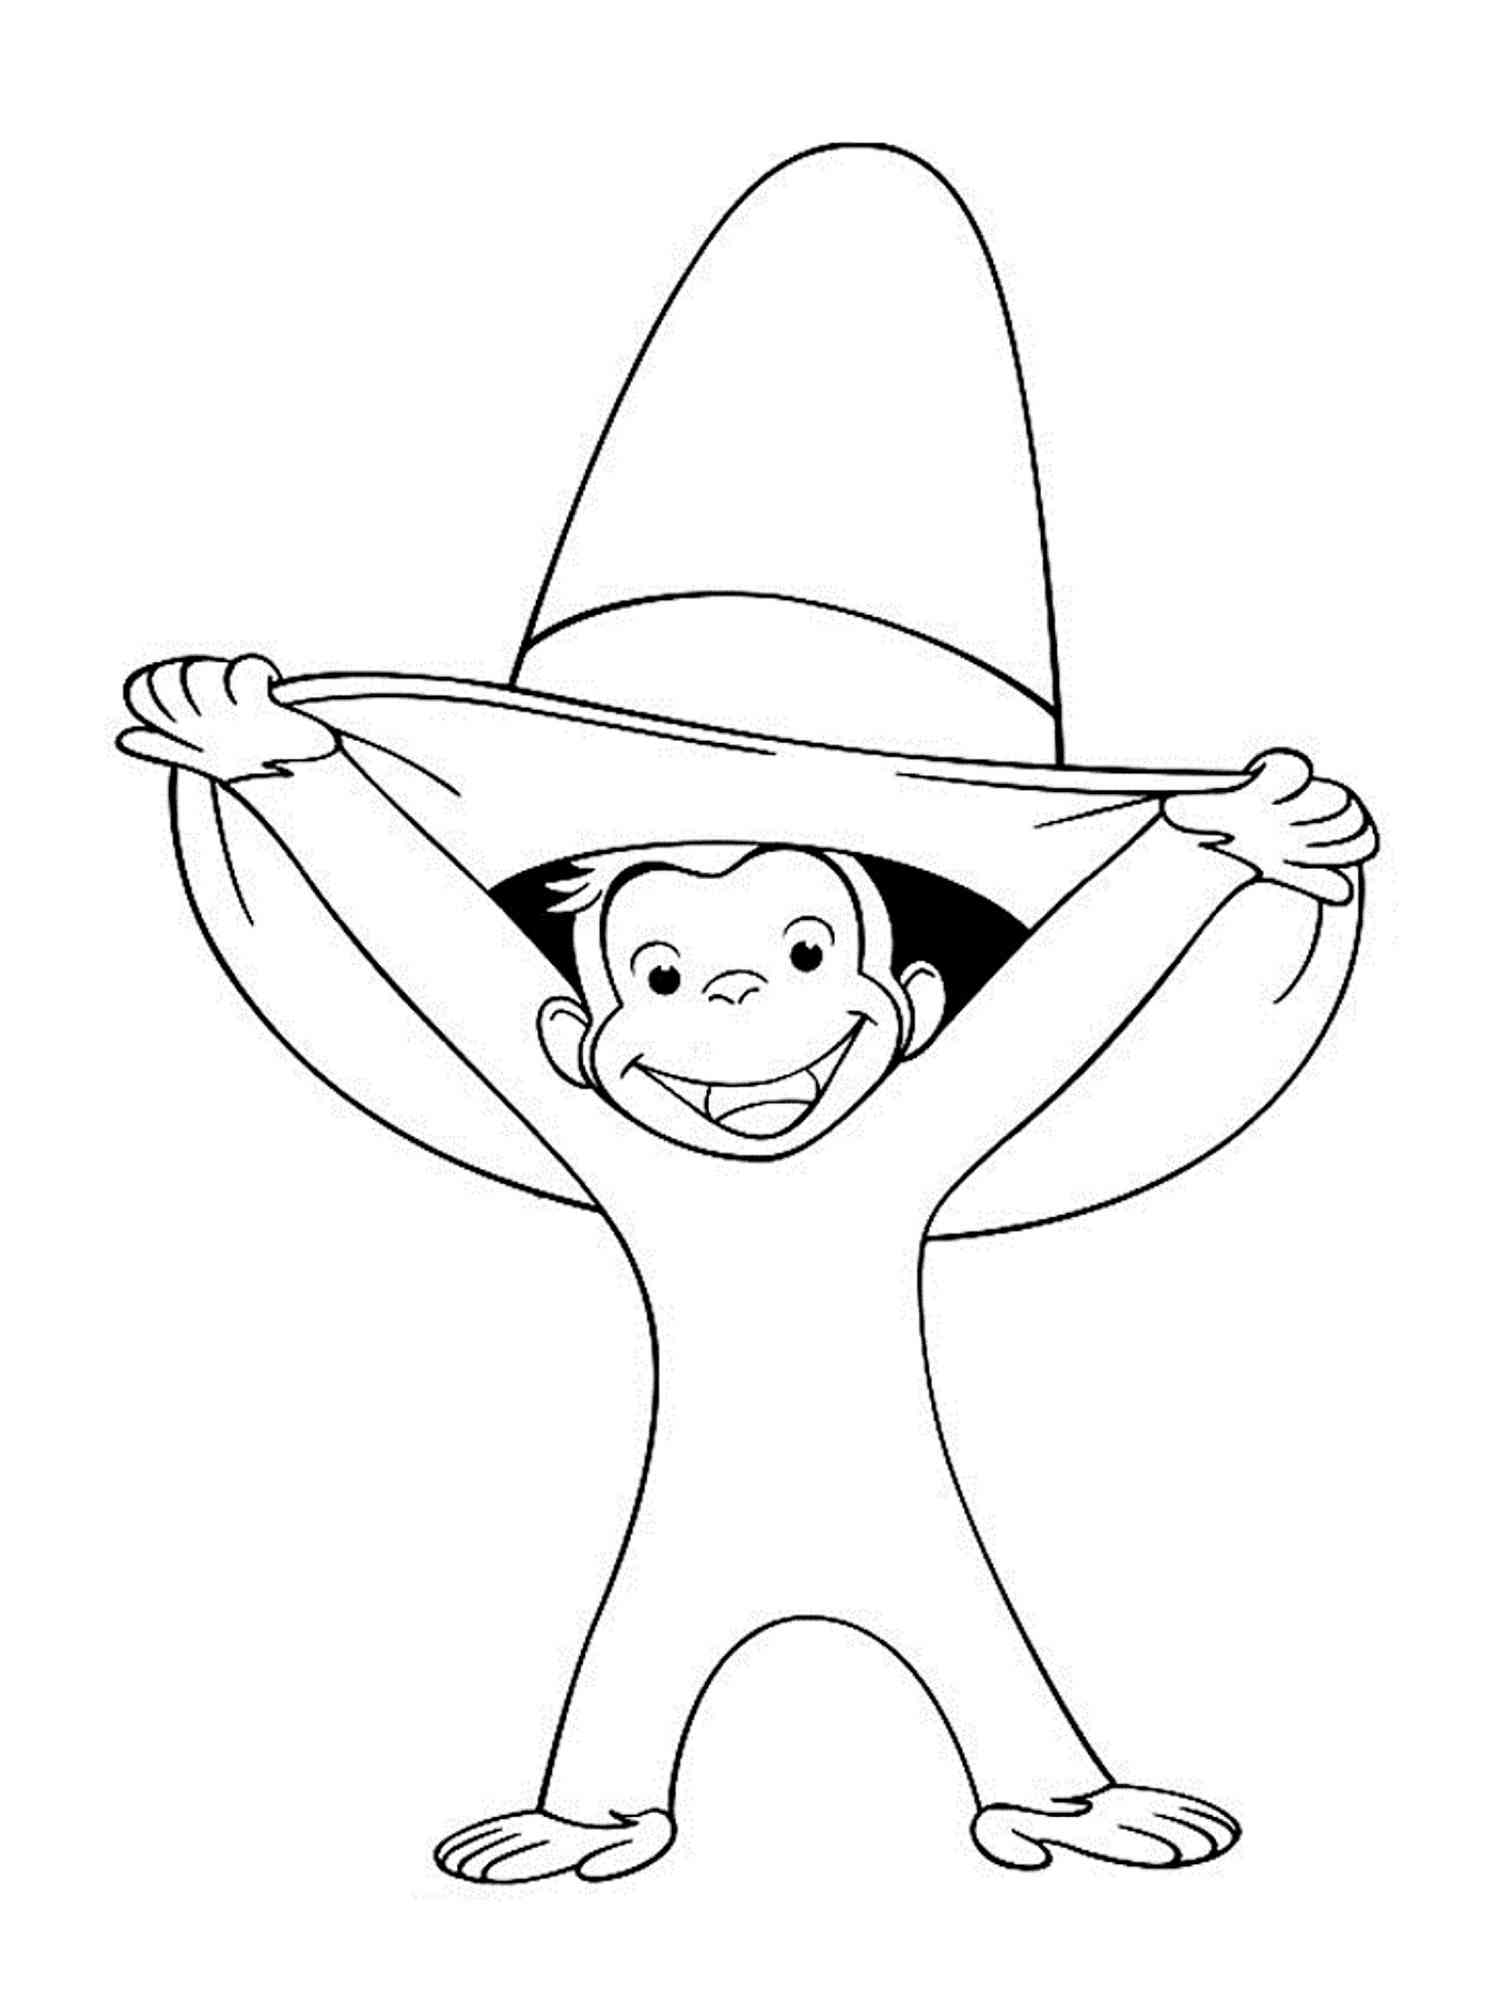 Curious George 24 coloring page